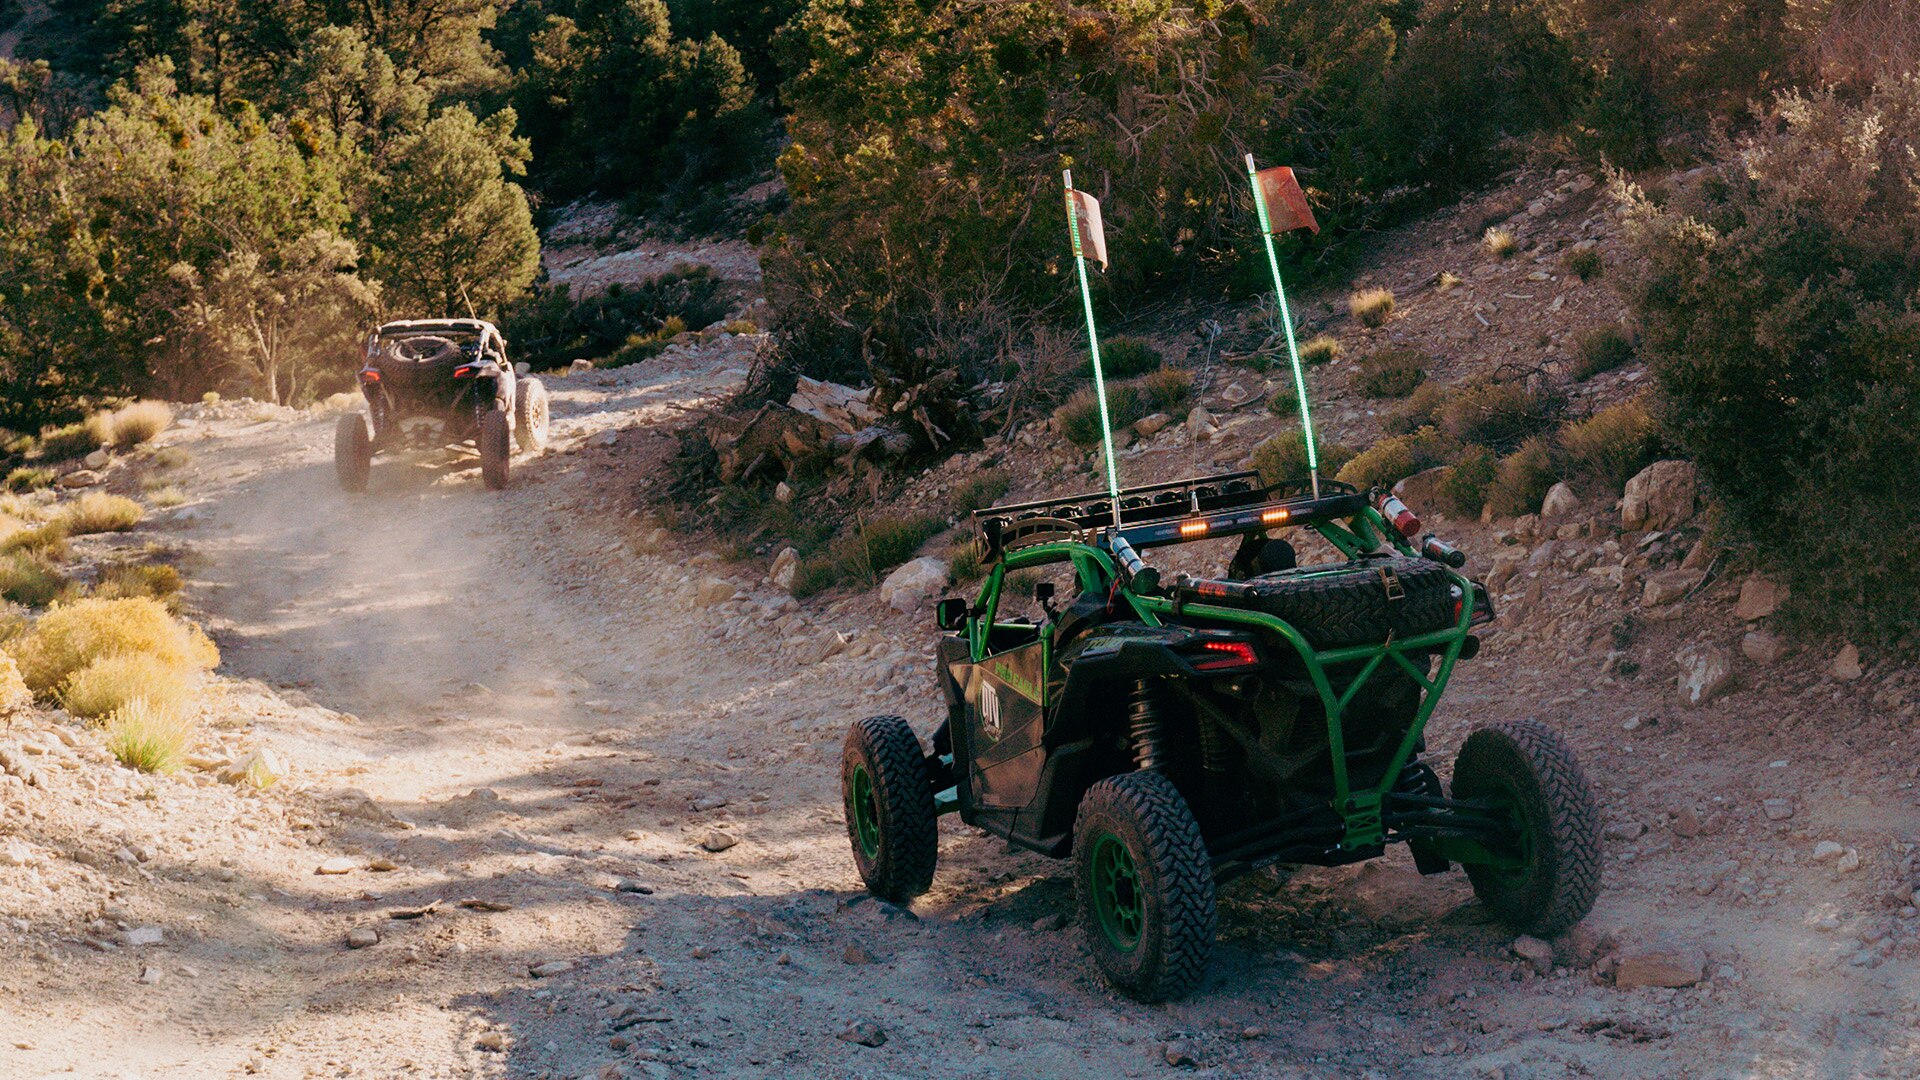 Can-Am riders driving side-by-side vehicles on a dirt of trail leading to a forest.